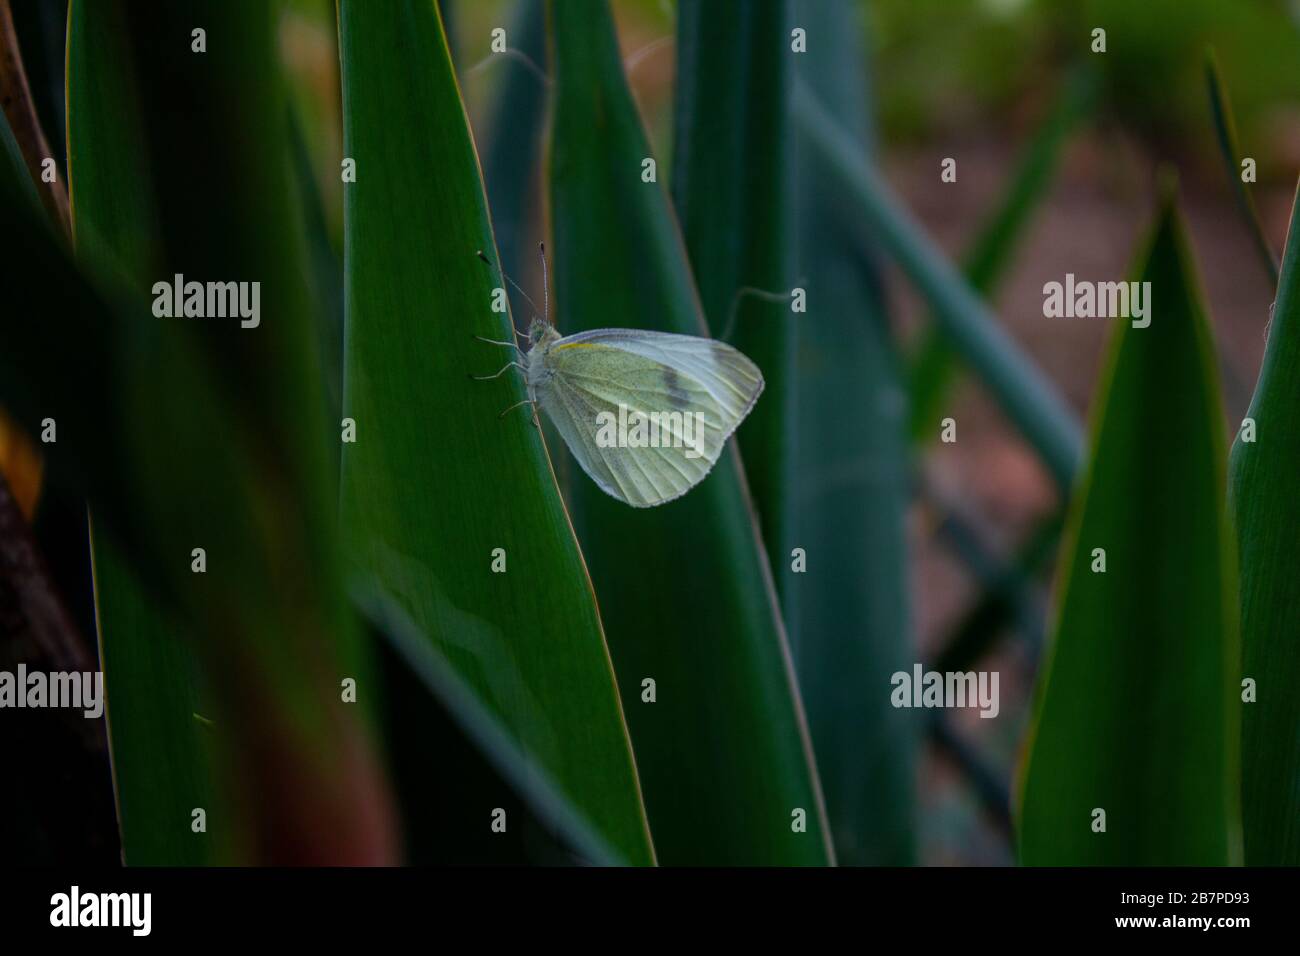 White Butterfly on a yucca leaf blade Stock Photo